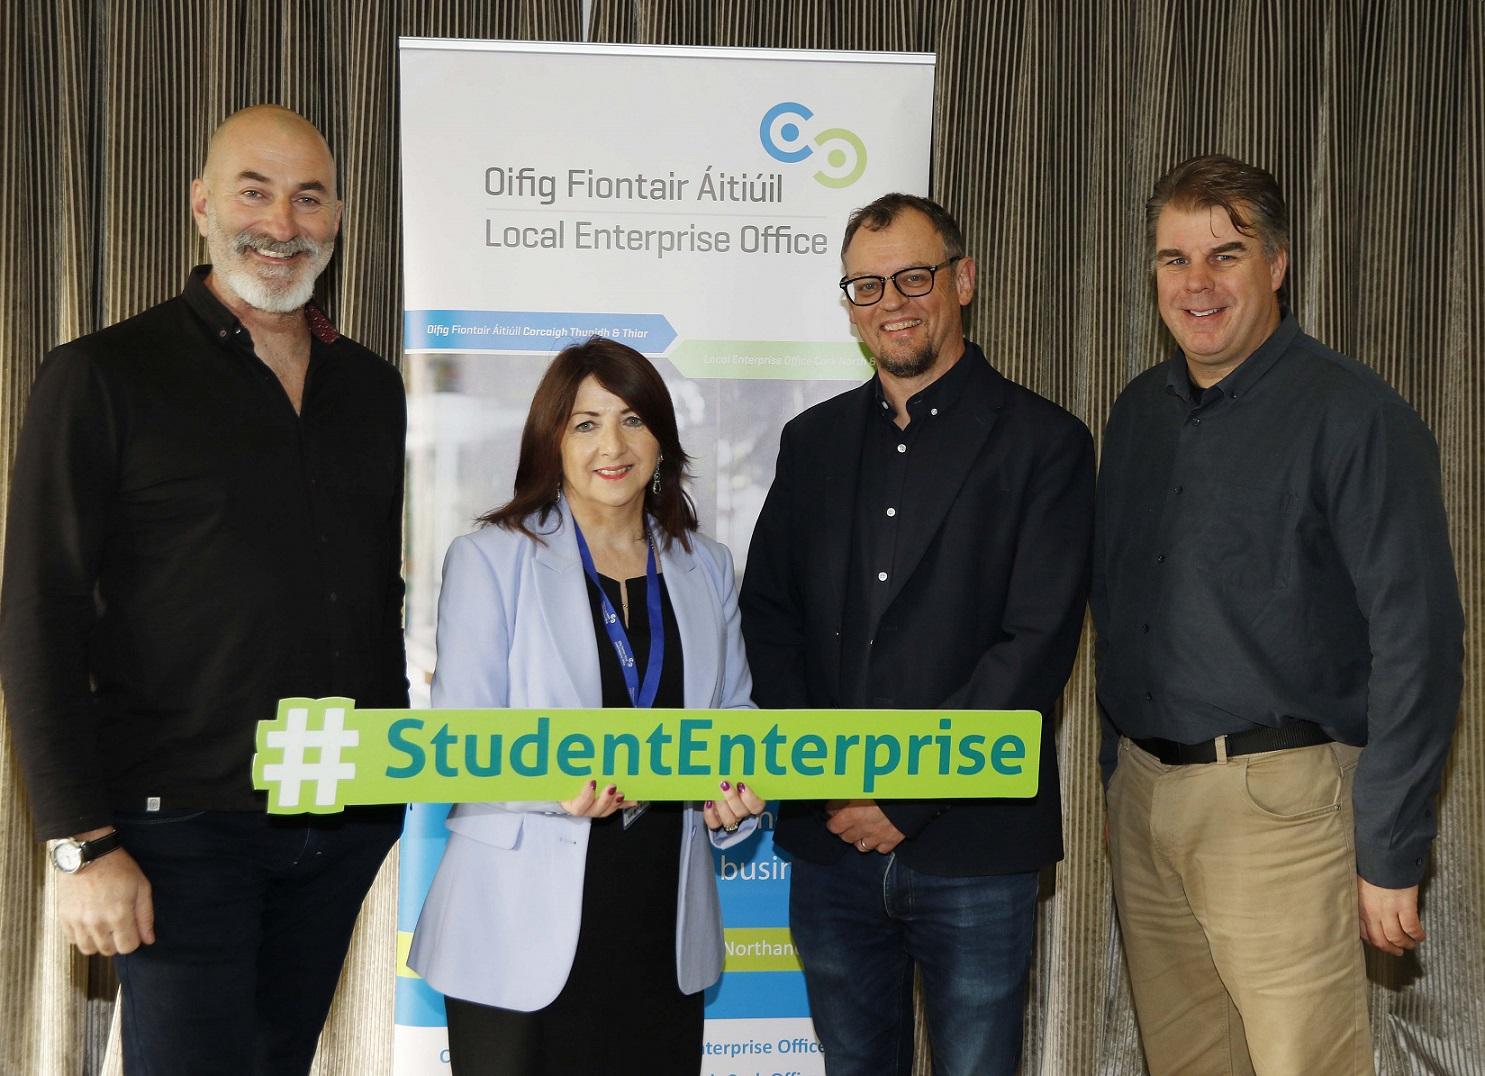        Pictured at the Schools Enterprise Programme Innovation Day at the Charleville Park Hotel were Andrea Splendori (left) and Michael Keogh (right) of the Enterprise Academy with Joan Kelleher of the Local Enterprise Office Mallow and Gary Lowe, Programme Co-ordinator.